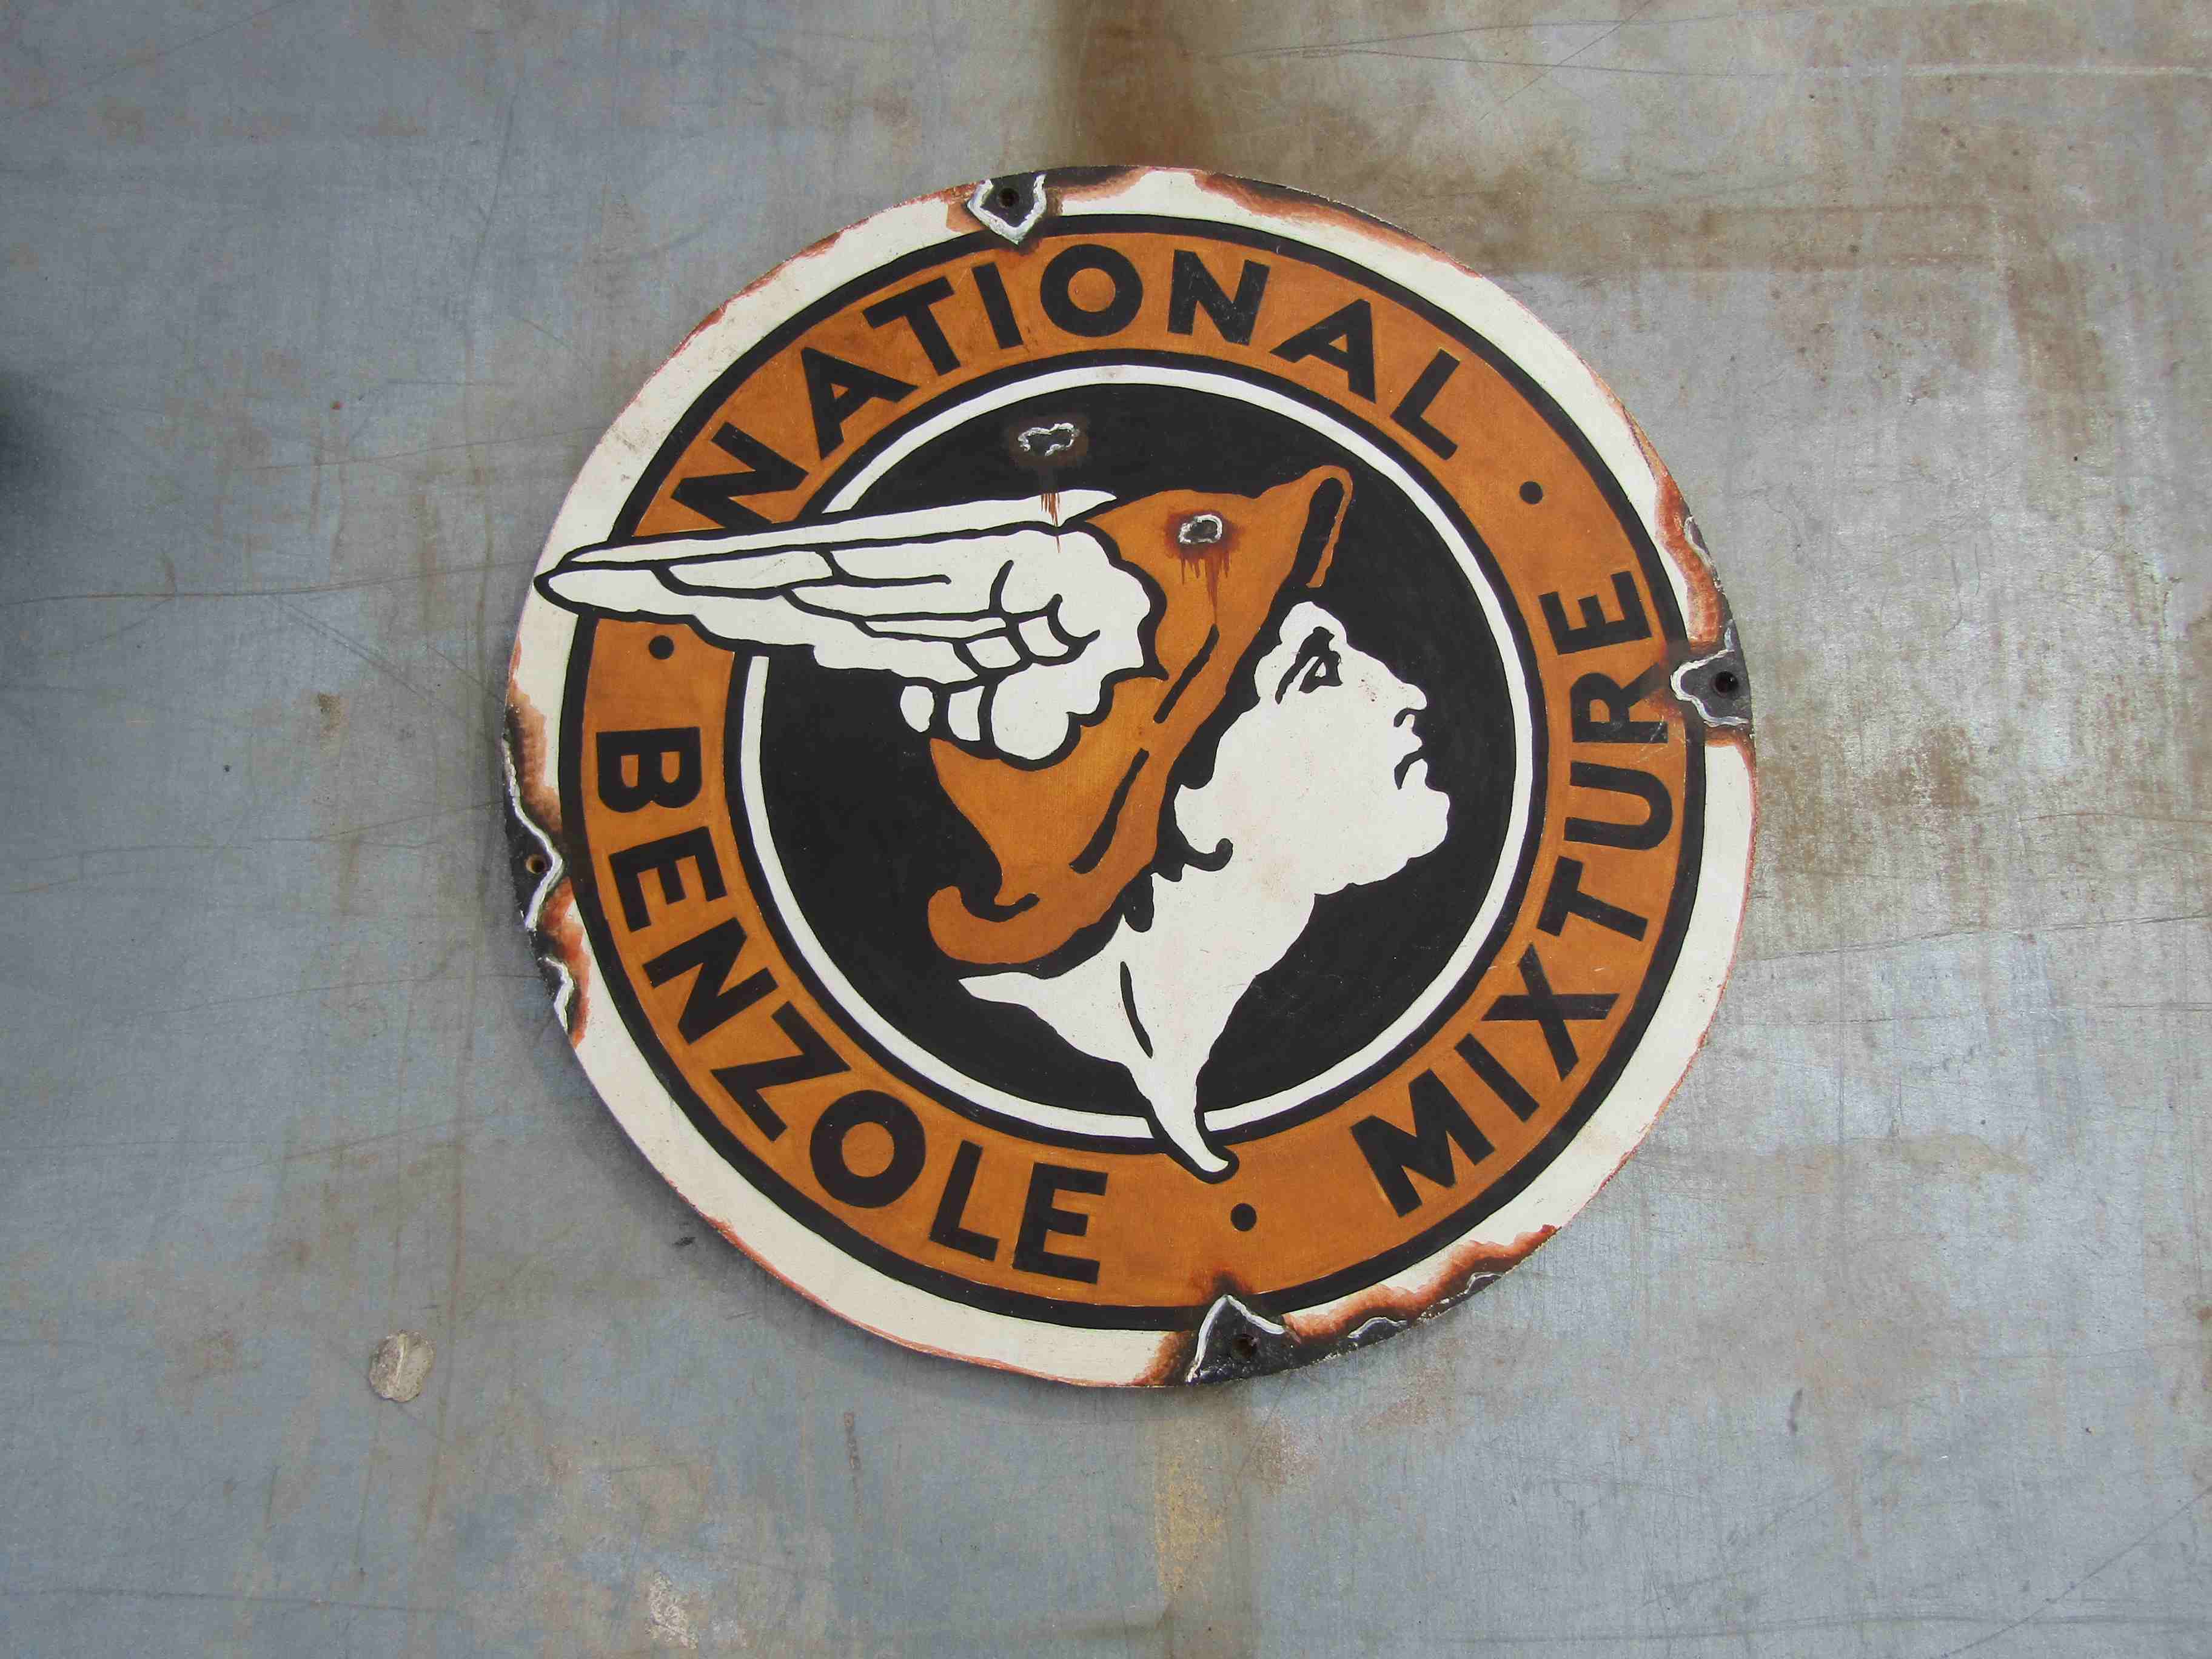 A National Benzole advertising sign - 45cm diameter